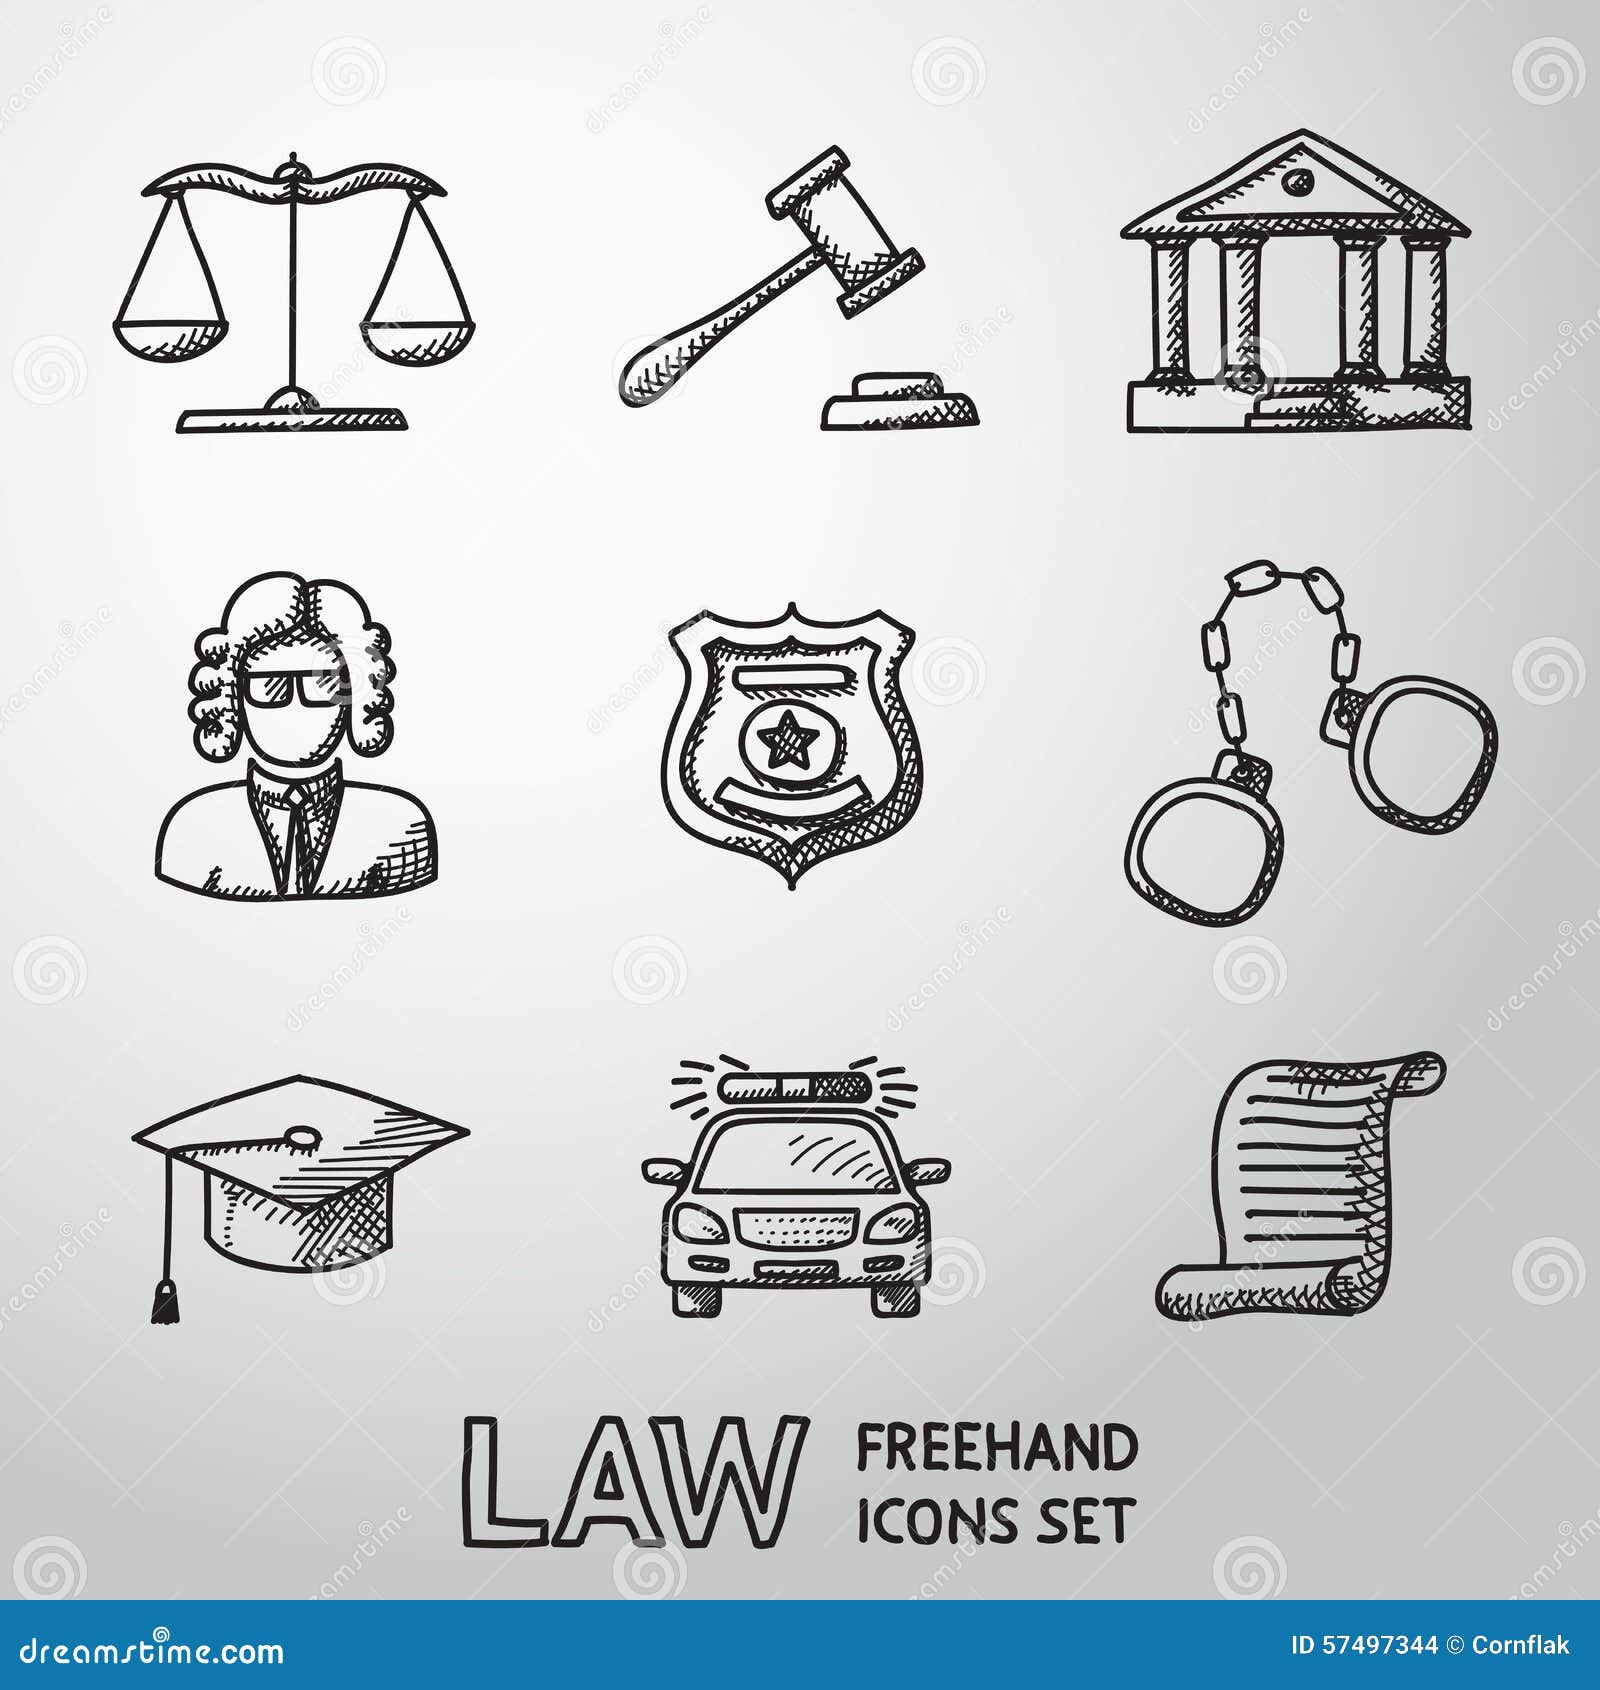 microsoft clip art scales of justice - photo #43